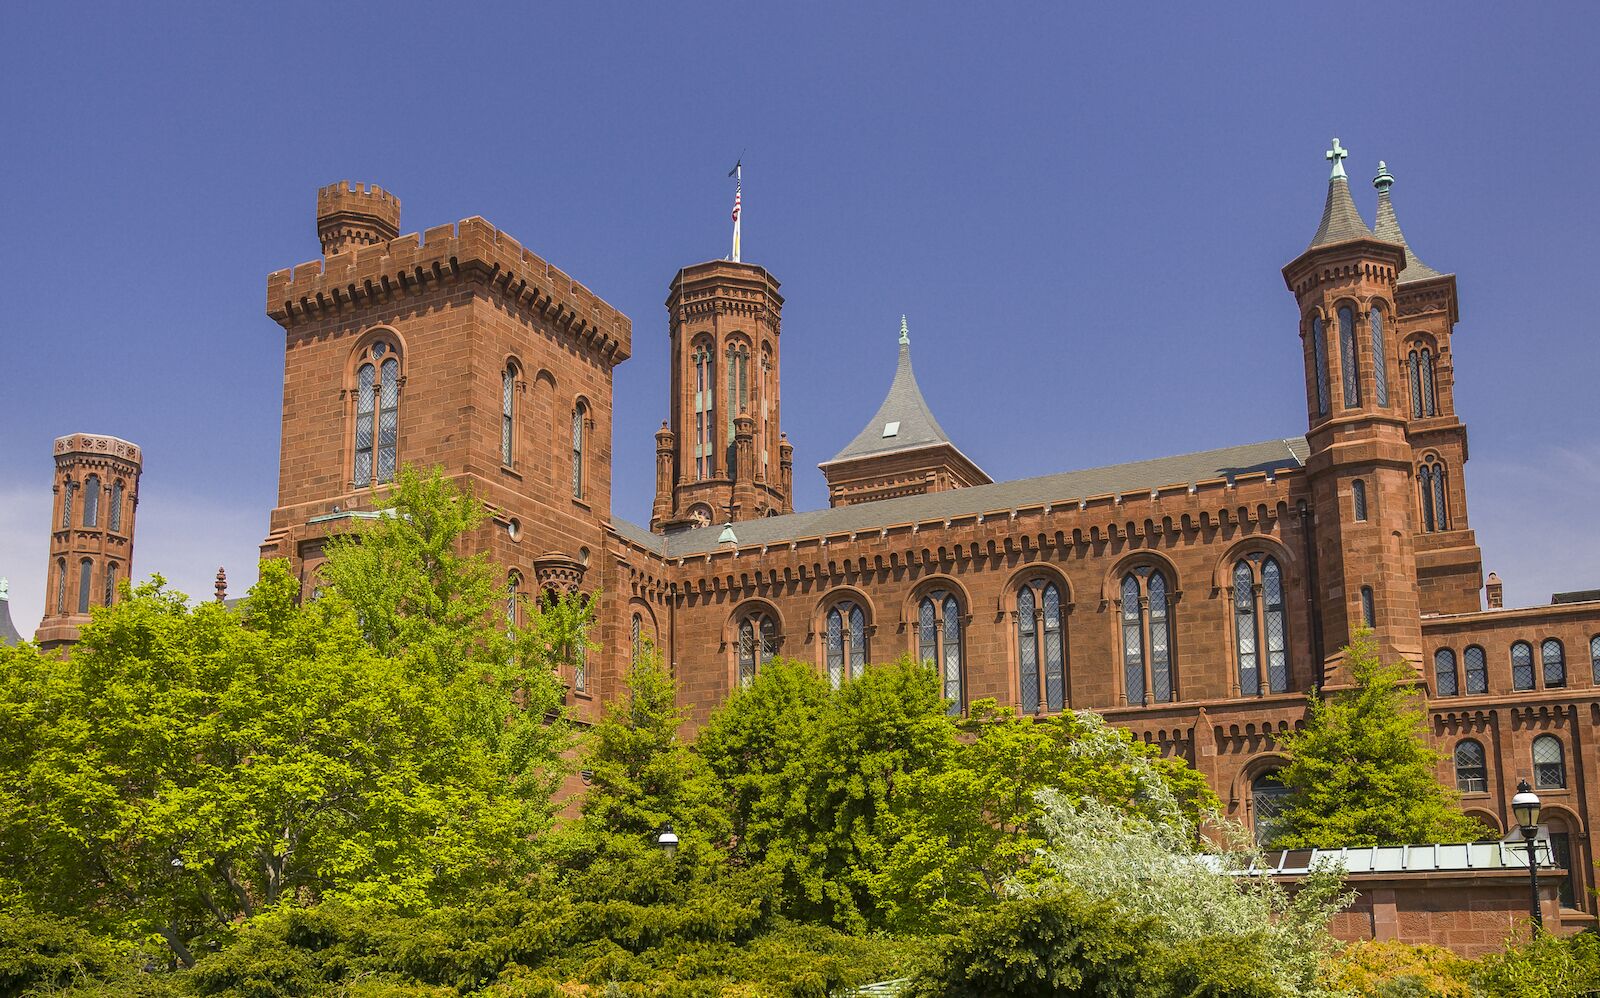 The Smithsonian Institution Building also known as The Castle